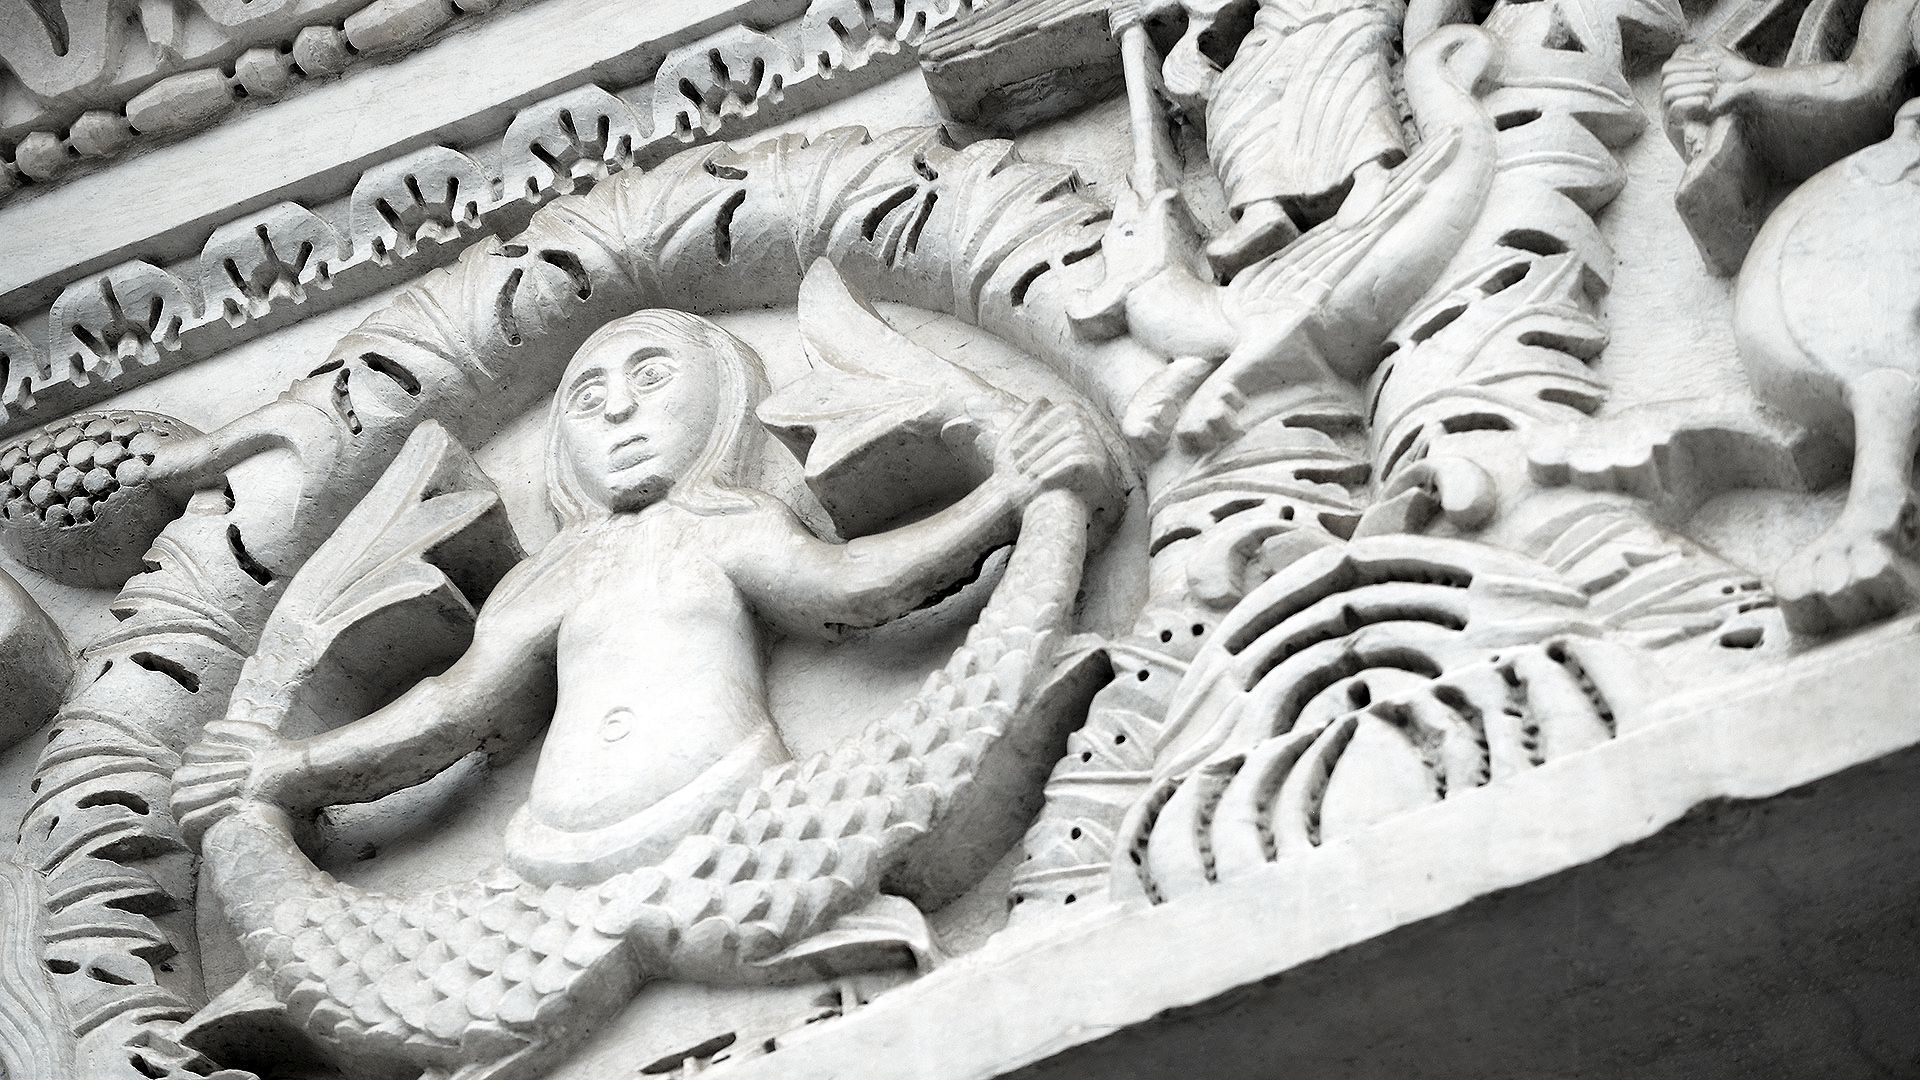 two-tailed siren on the façade of the San Michele church in Lucca